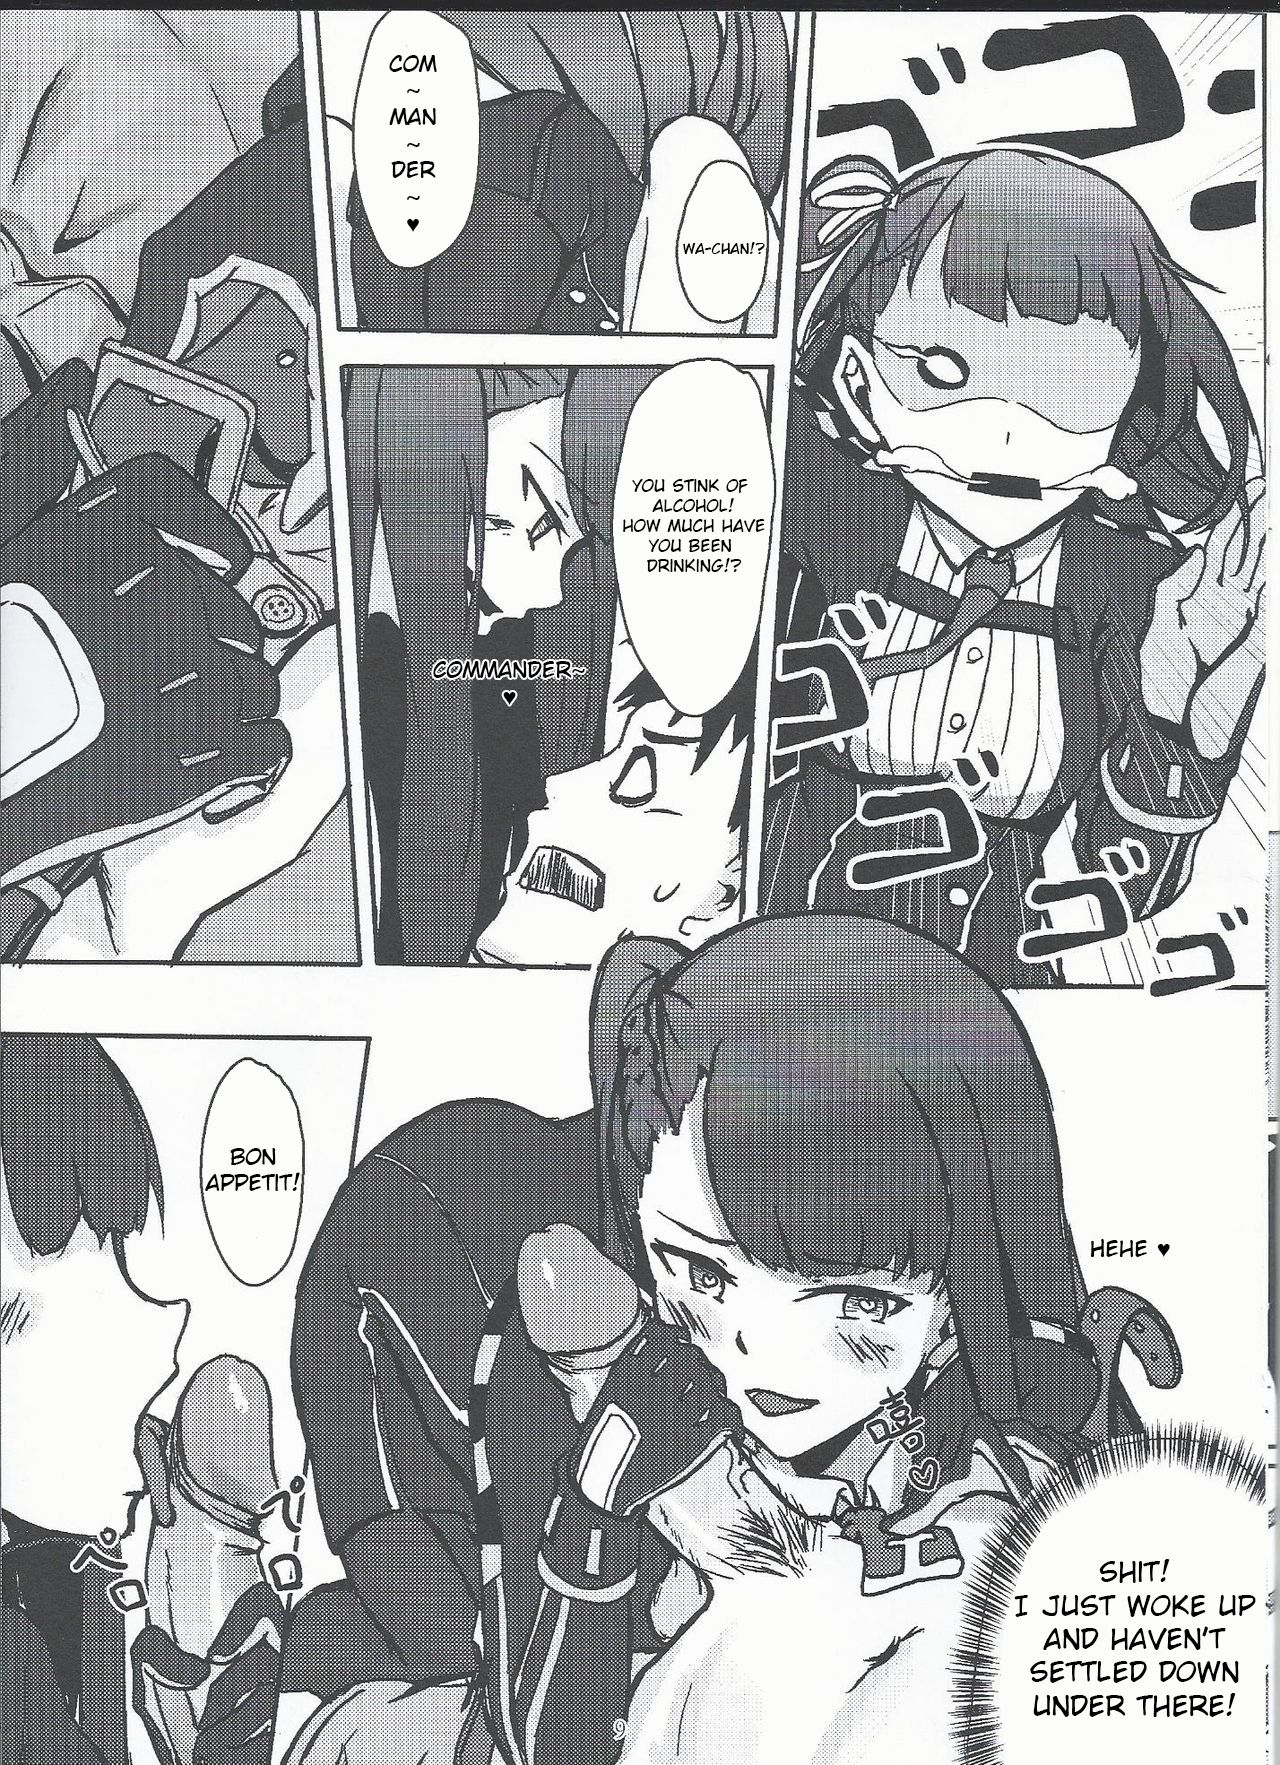 (FF32) [Sumi (九曜)] I don't know what to title this book, but anyway it's about WA2000 (Girls Frontline) [English] page 8 full